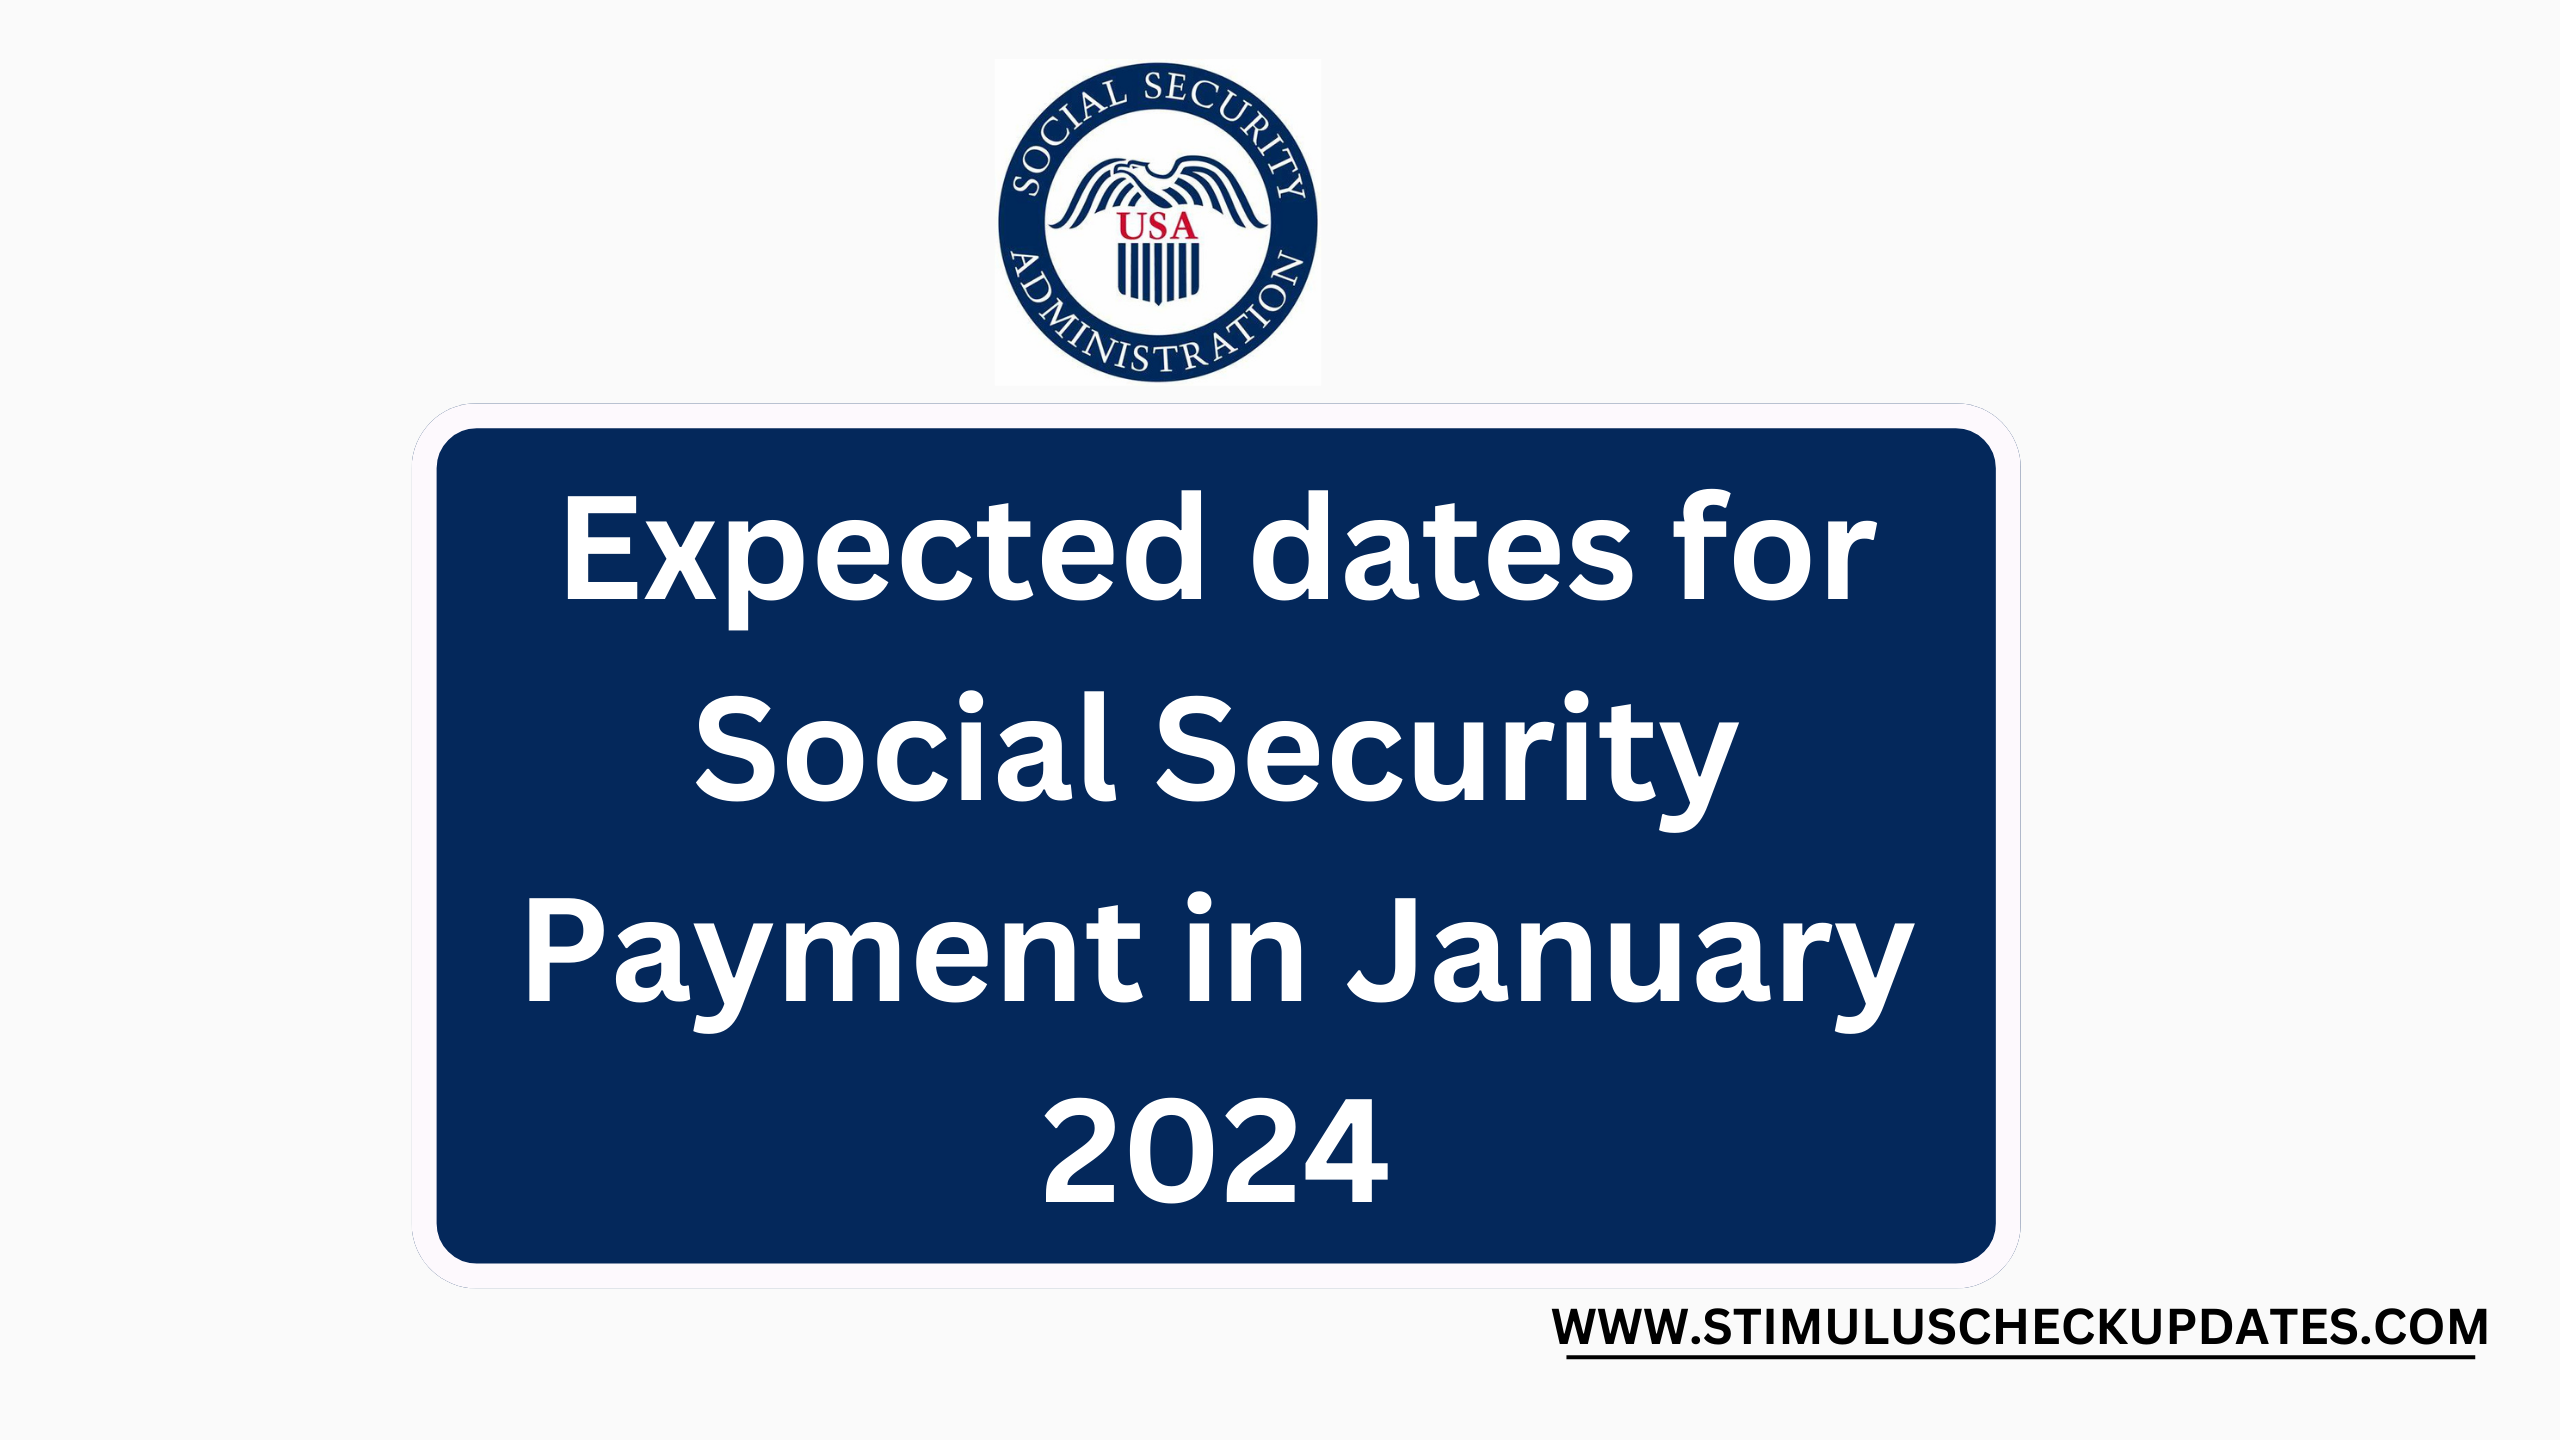 Expected Dates For Social Security Payment In January 2024